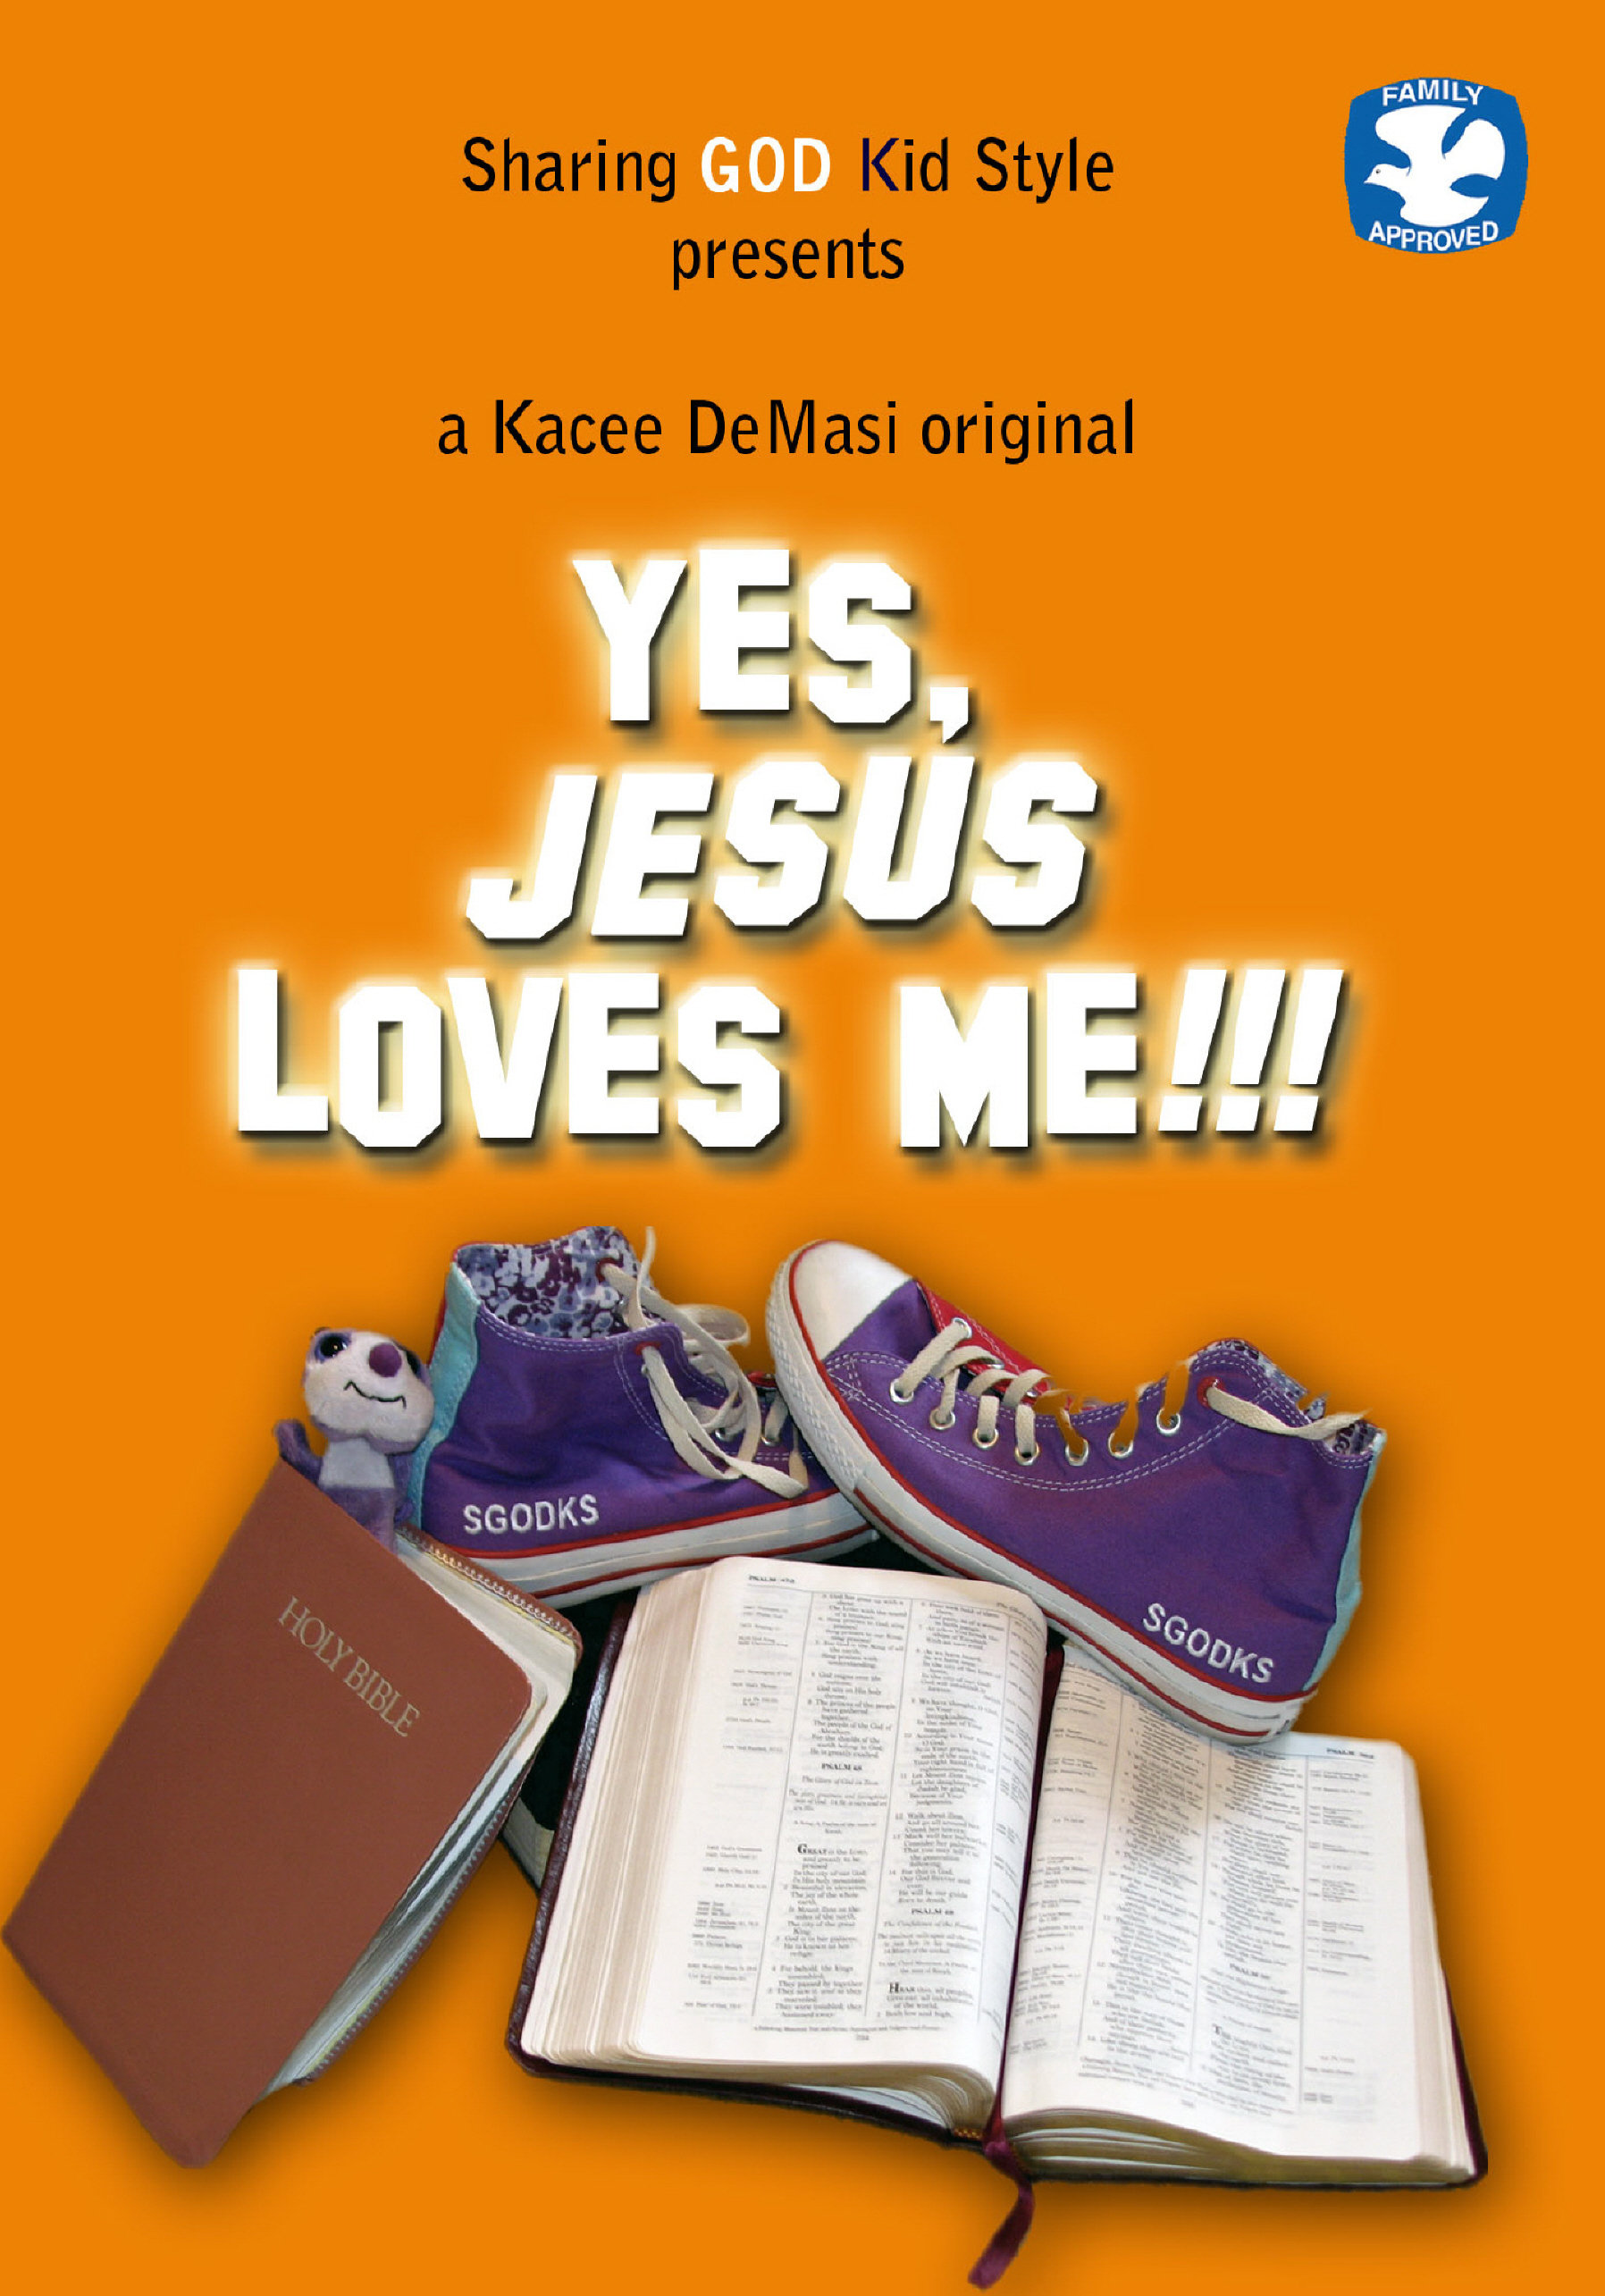 Movie Poster and Front DVD cover for Kacee DeMasi's film, 'Yes, JESUS Loves Me!!!' Poster design by Michele Gottlieb. Starring Julia Grosso, Alexa Gardner, Tara Hadley, Hope Duong and Kacee DeMasi